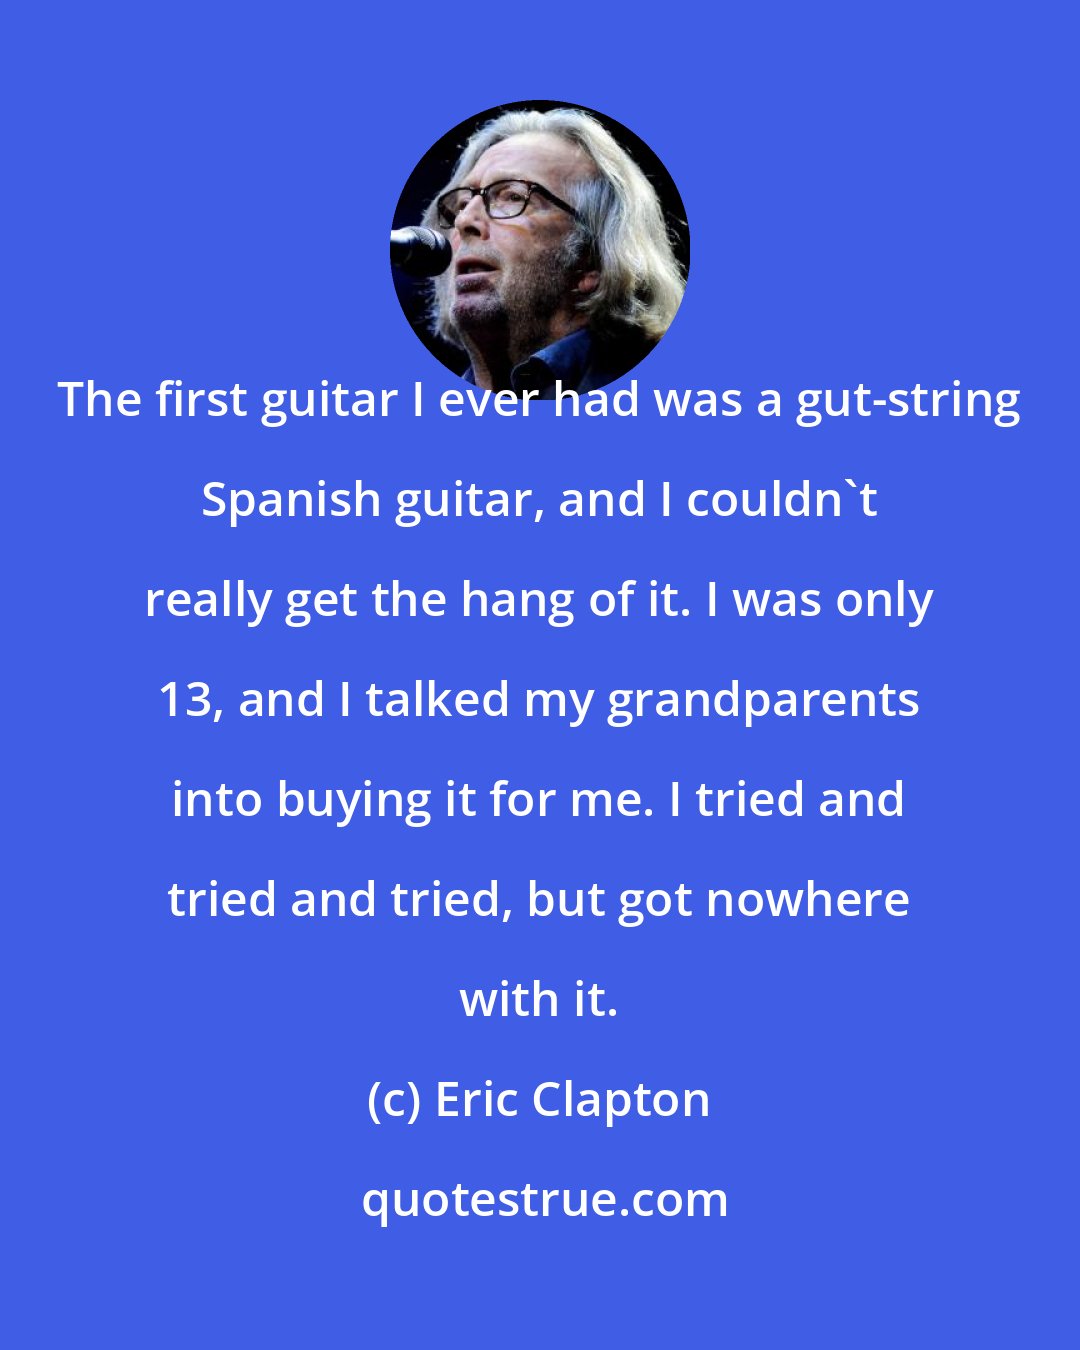 Eric Clapton: The first guitar I ever had was a gut-string Spanish guitar, and I couldn't really get the hang of it. I was only 13, and I talked my grandparents into buying it for me. I tried and tried and tried, but got nowhere with it.